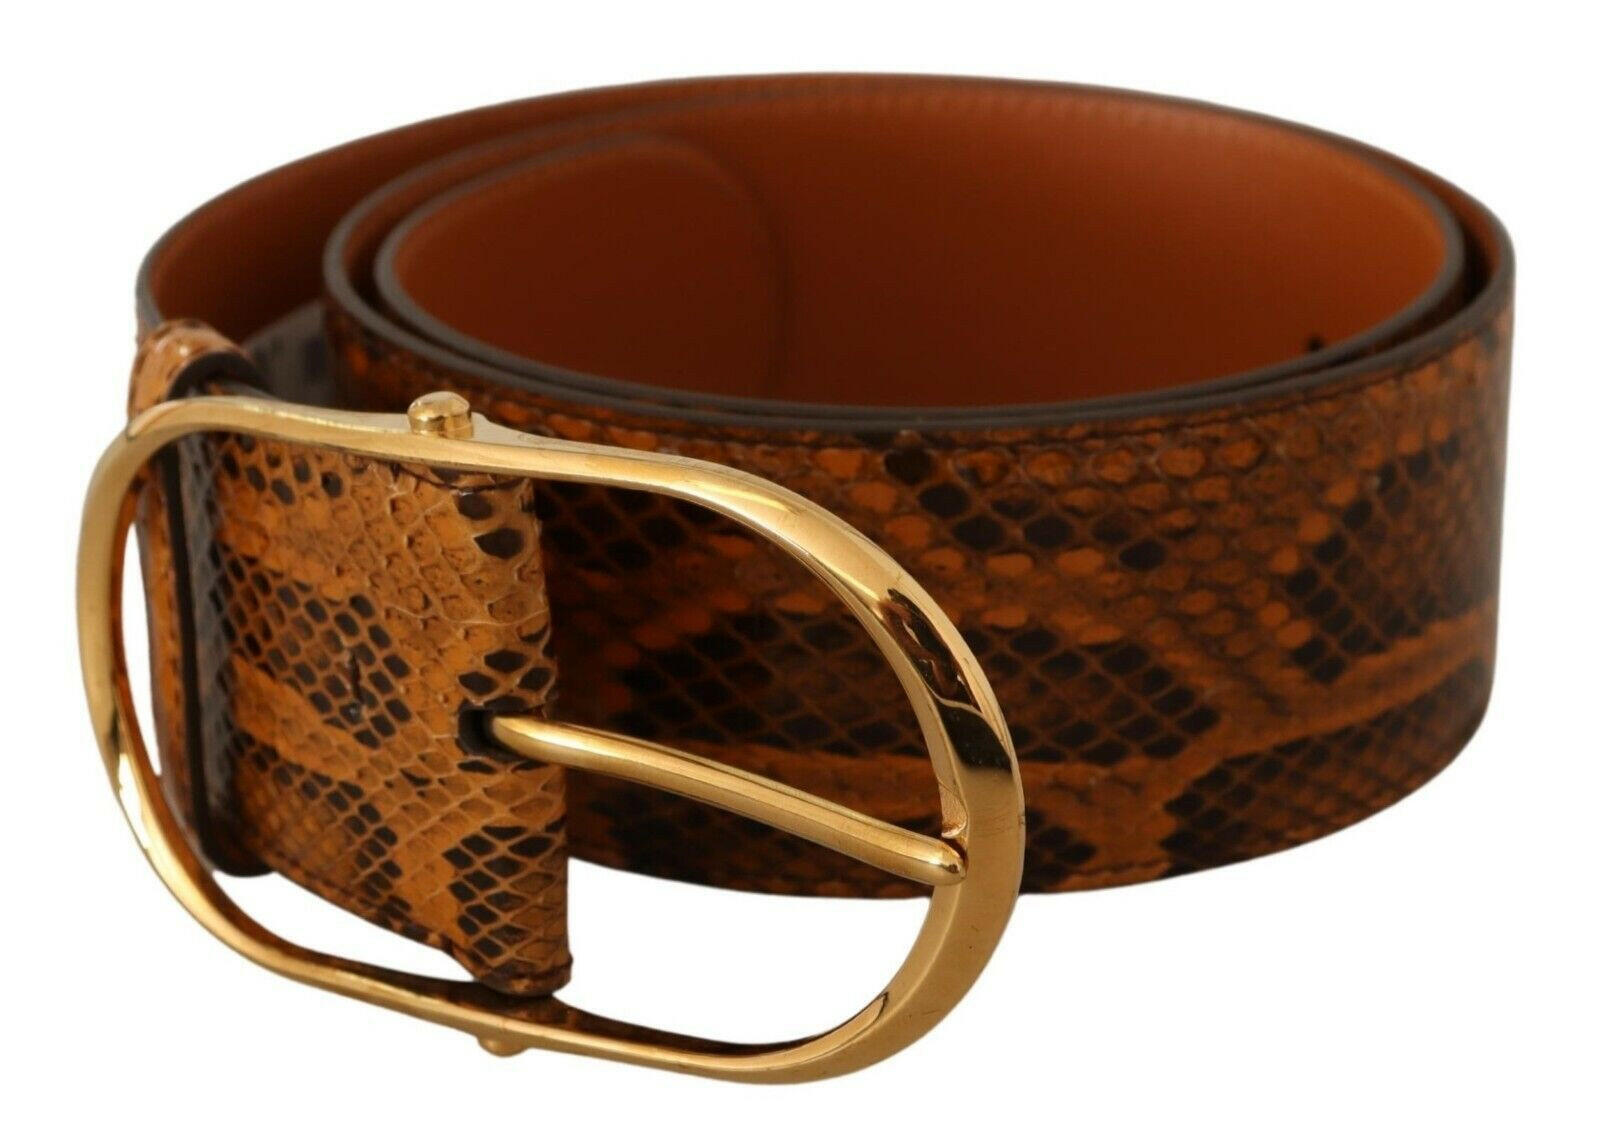 Dolce & Gabbana Brown Exotic Leather Gold Oval Buckle Belt - GENUINE AUTHENTIC BRAND LLC  